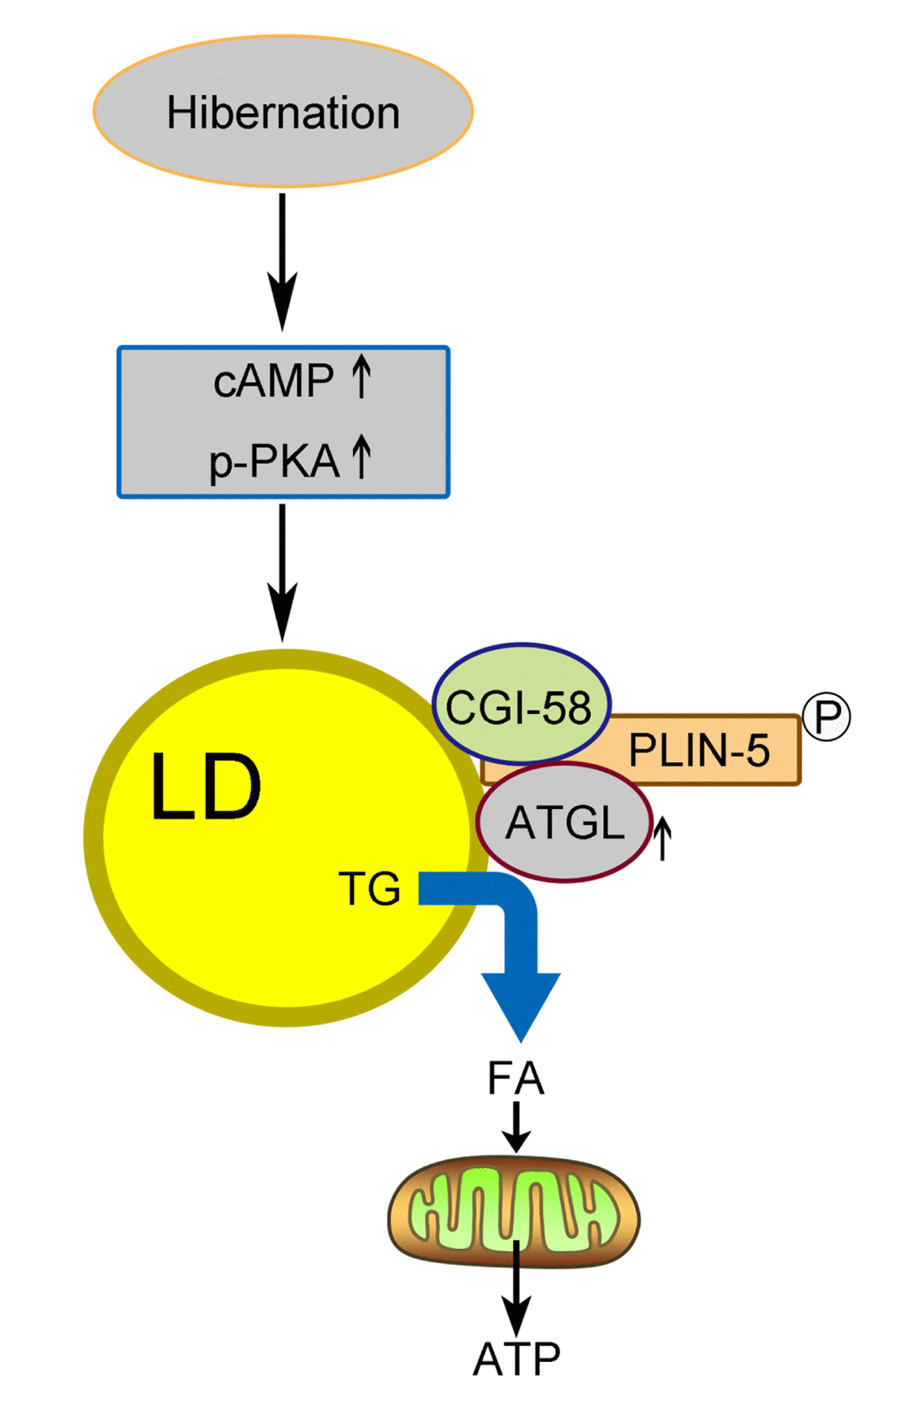 Schematic diagram of LD breakdown during hibernation in the liver of Chinese Soft-Shelled Turtle (Pelodiscus sinensis). Entering hibernation, activated cAMP/PKA signals in the liver recruit ATGL to the surface of the LDs. Meanwhile, phosphorylation of perilipin-5 on the LD surface promotes the CGI-58-mediated induction of ATGL via the interaction between CGI-58 and ATGL. Ultimately, FAs hydrolyzed from TGs stored in LDs are transported into mitochondria for β-oxidation, thereby maintaining energy hemostasis in the body.